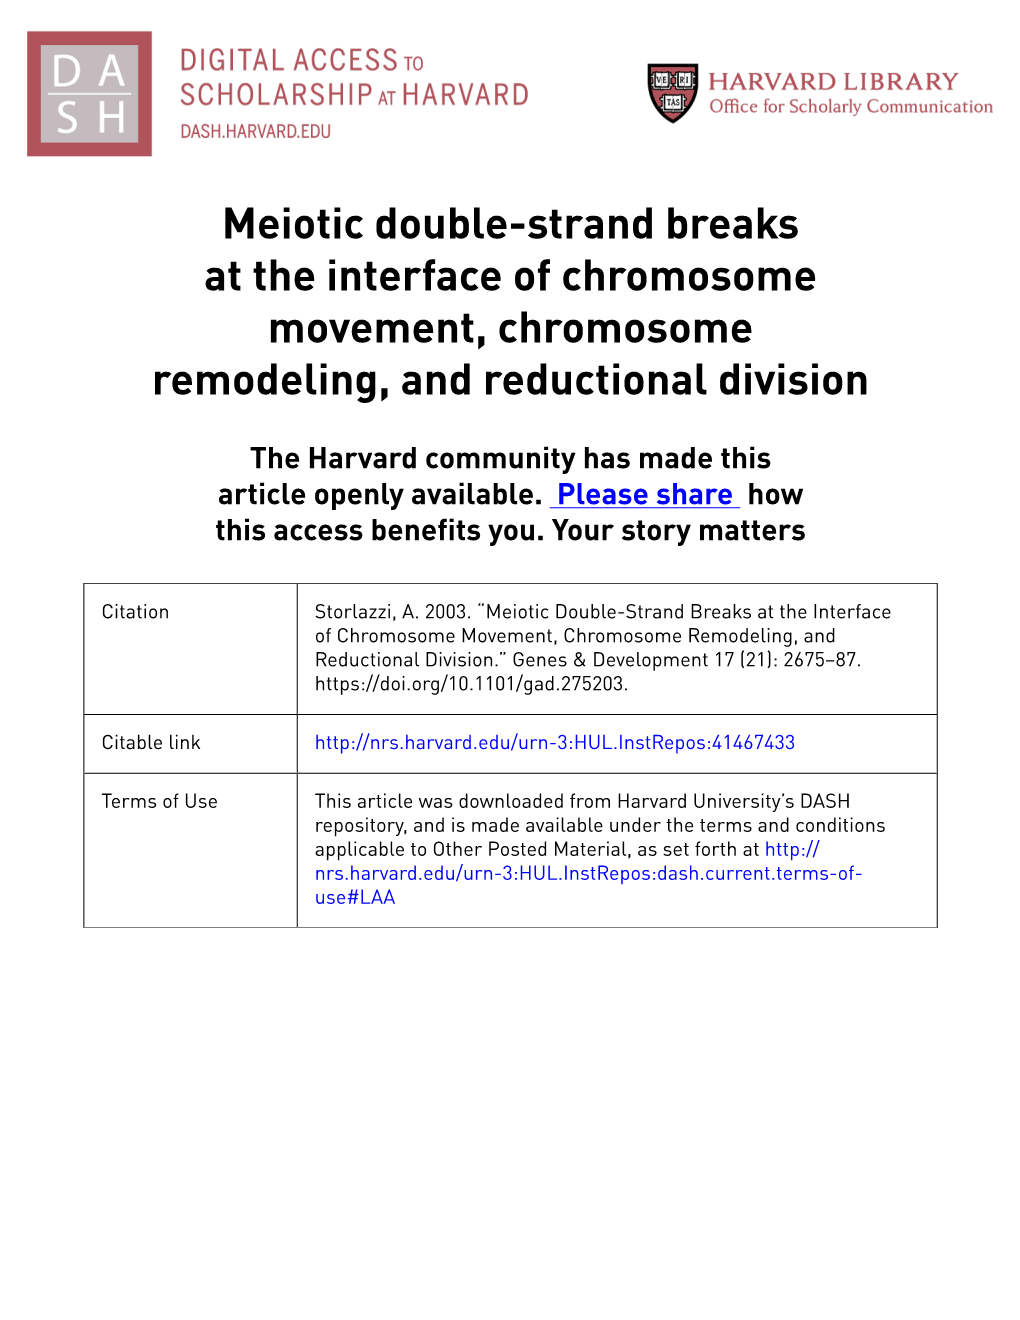 Meiotic Double-Strand Breaks at the Interface of Chromosome Movement, Chromosome Remodeling, and Reductional Division